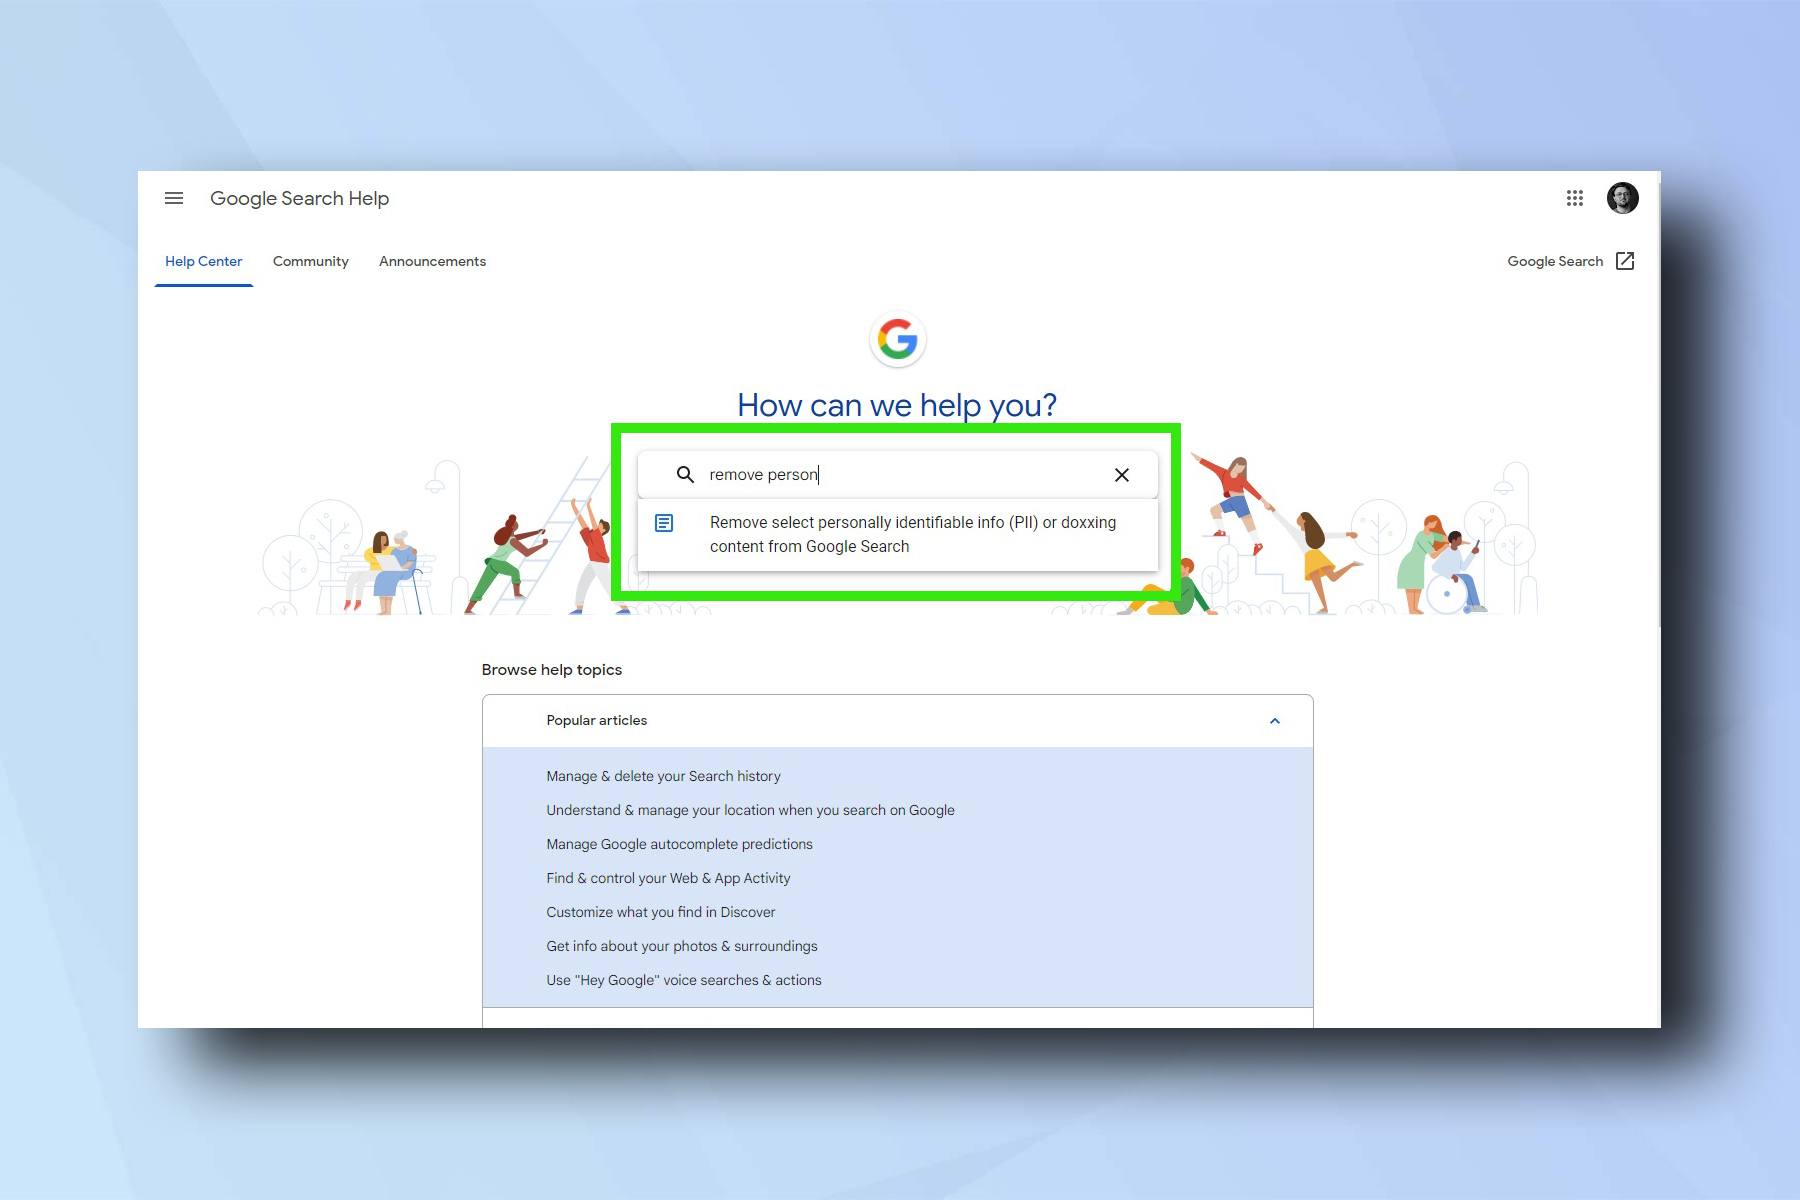 Google search help page with text entry in search bar - to show you how to remove contact details from Google search